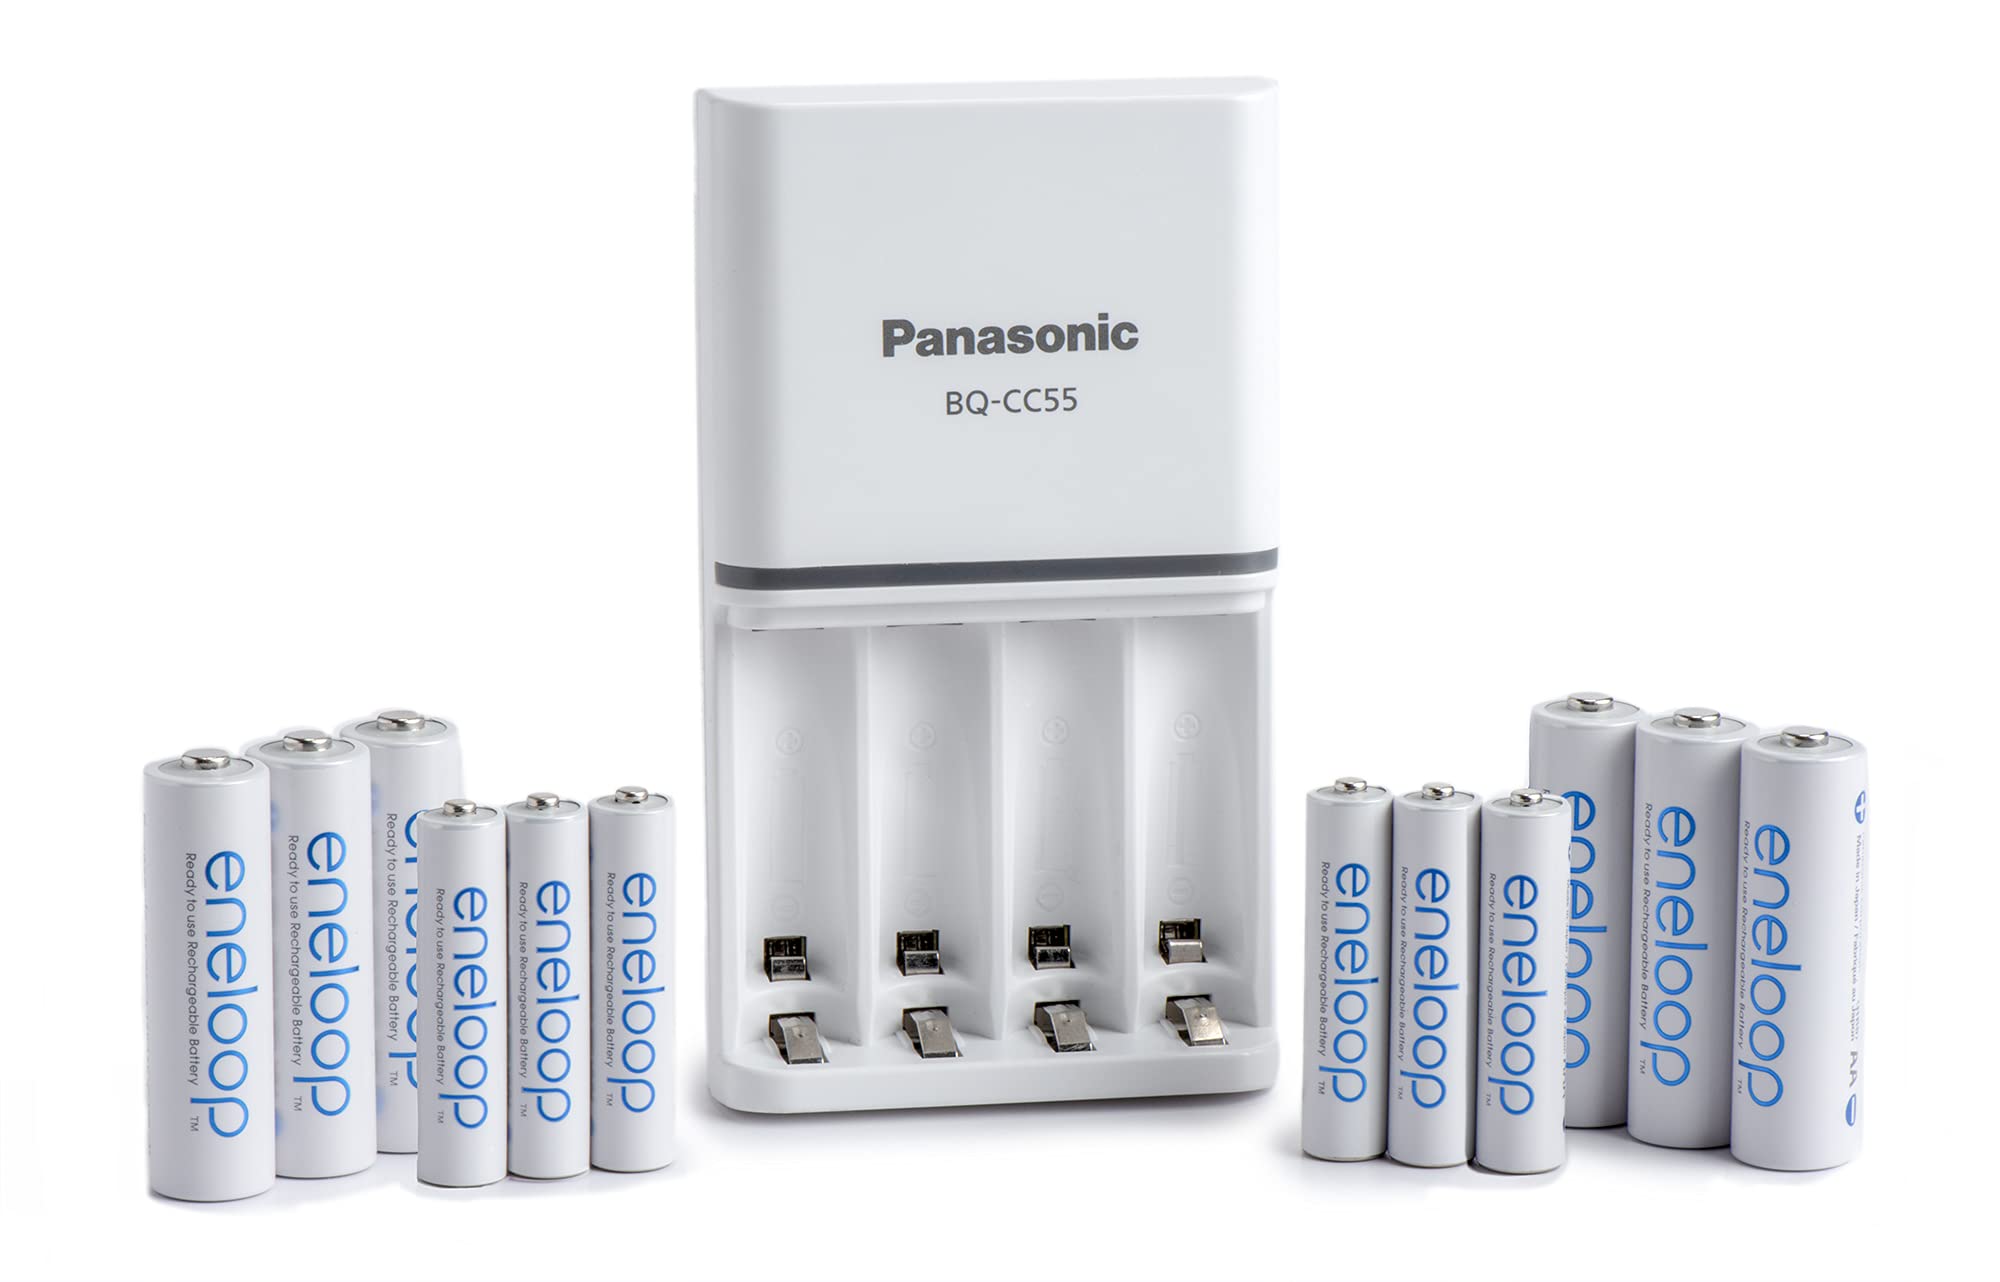 Panasonic K-KJ55MBS66A eneloop Power Pack; 6AA, 6AAA, and Advanced Battery 3 Hour Quick Charger